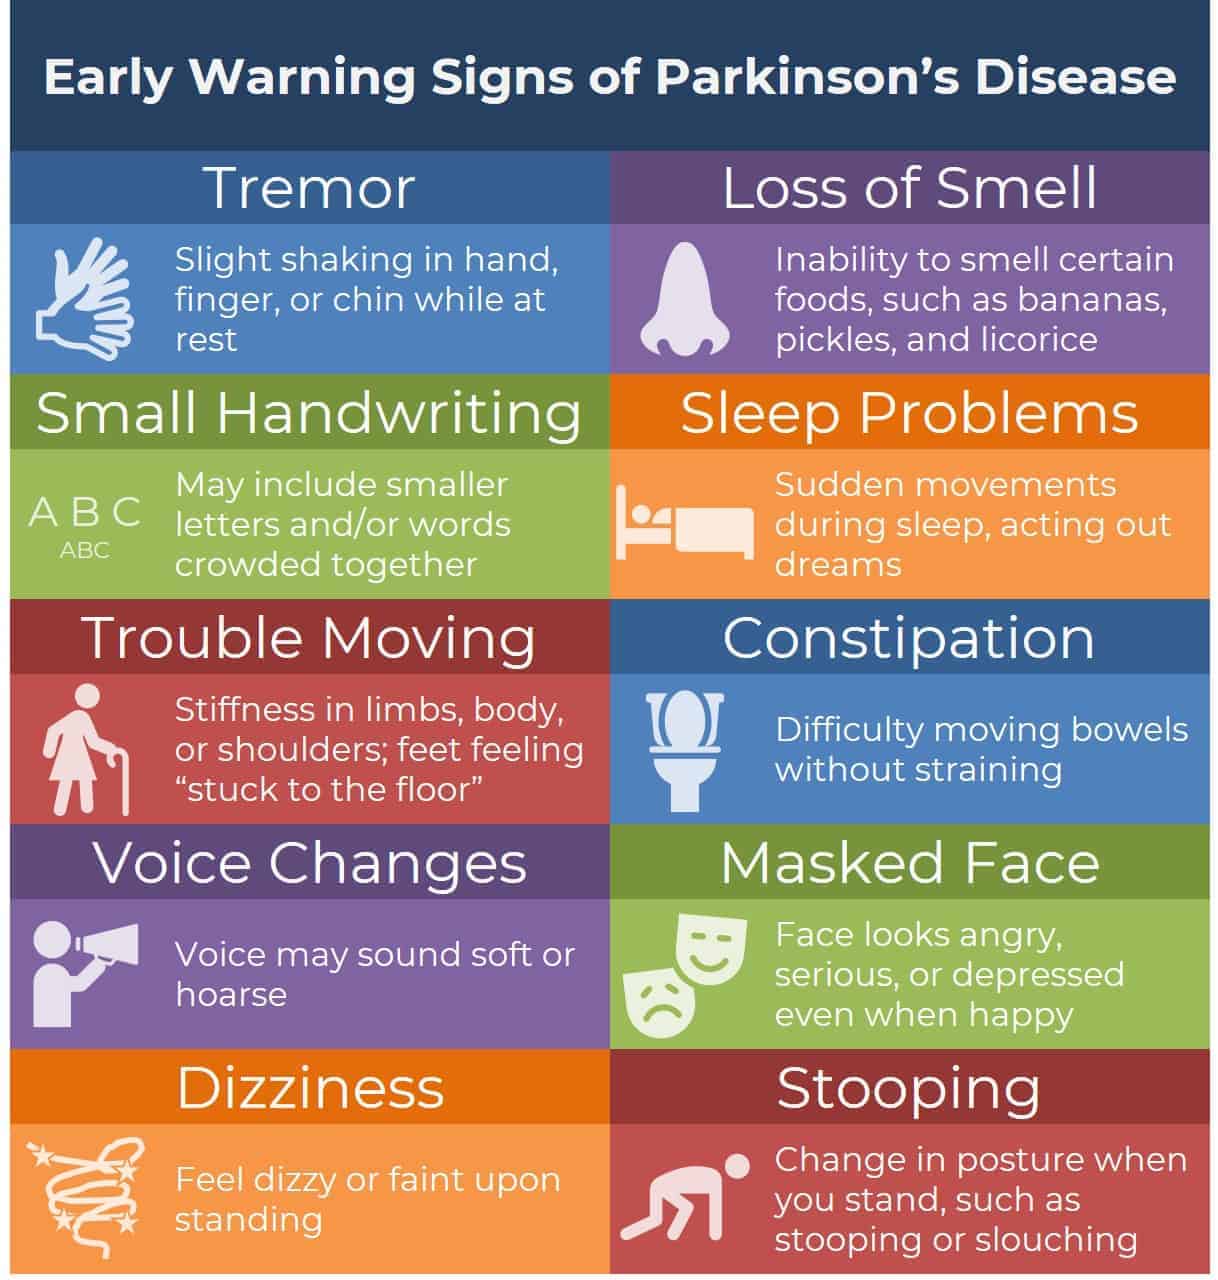 What Are Early Warning Signs Of Parkinson